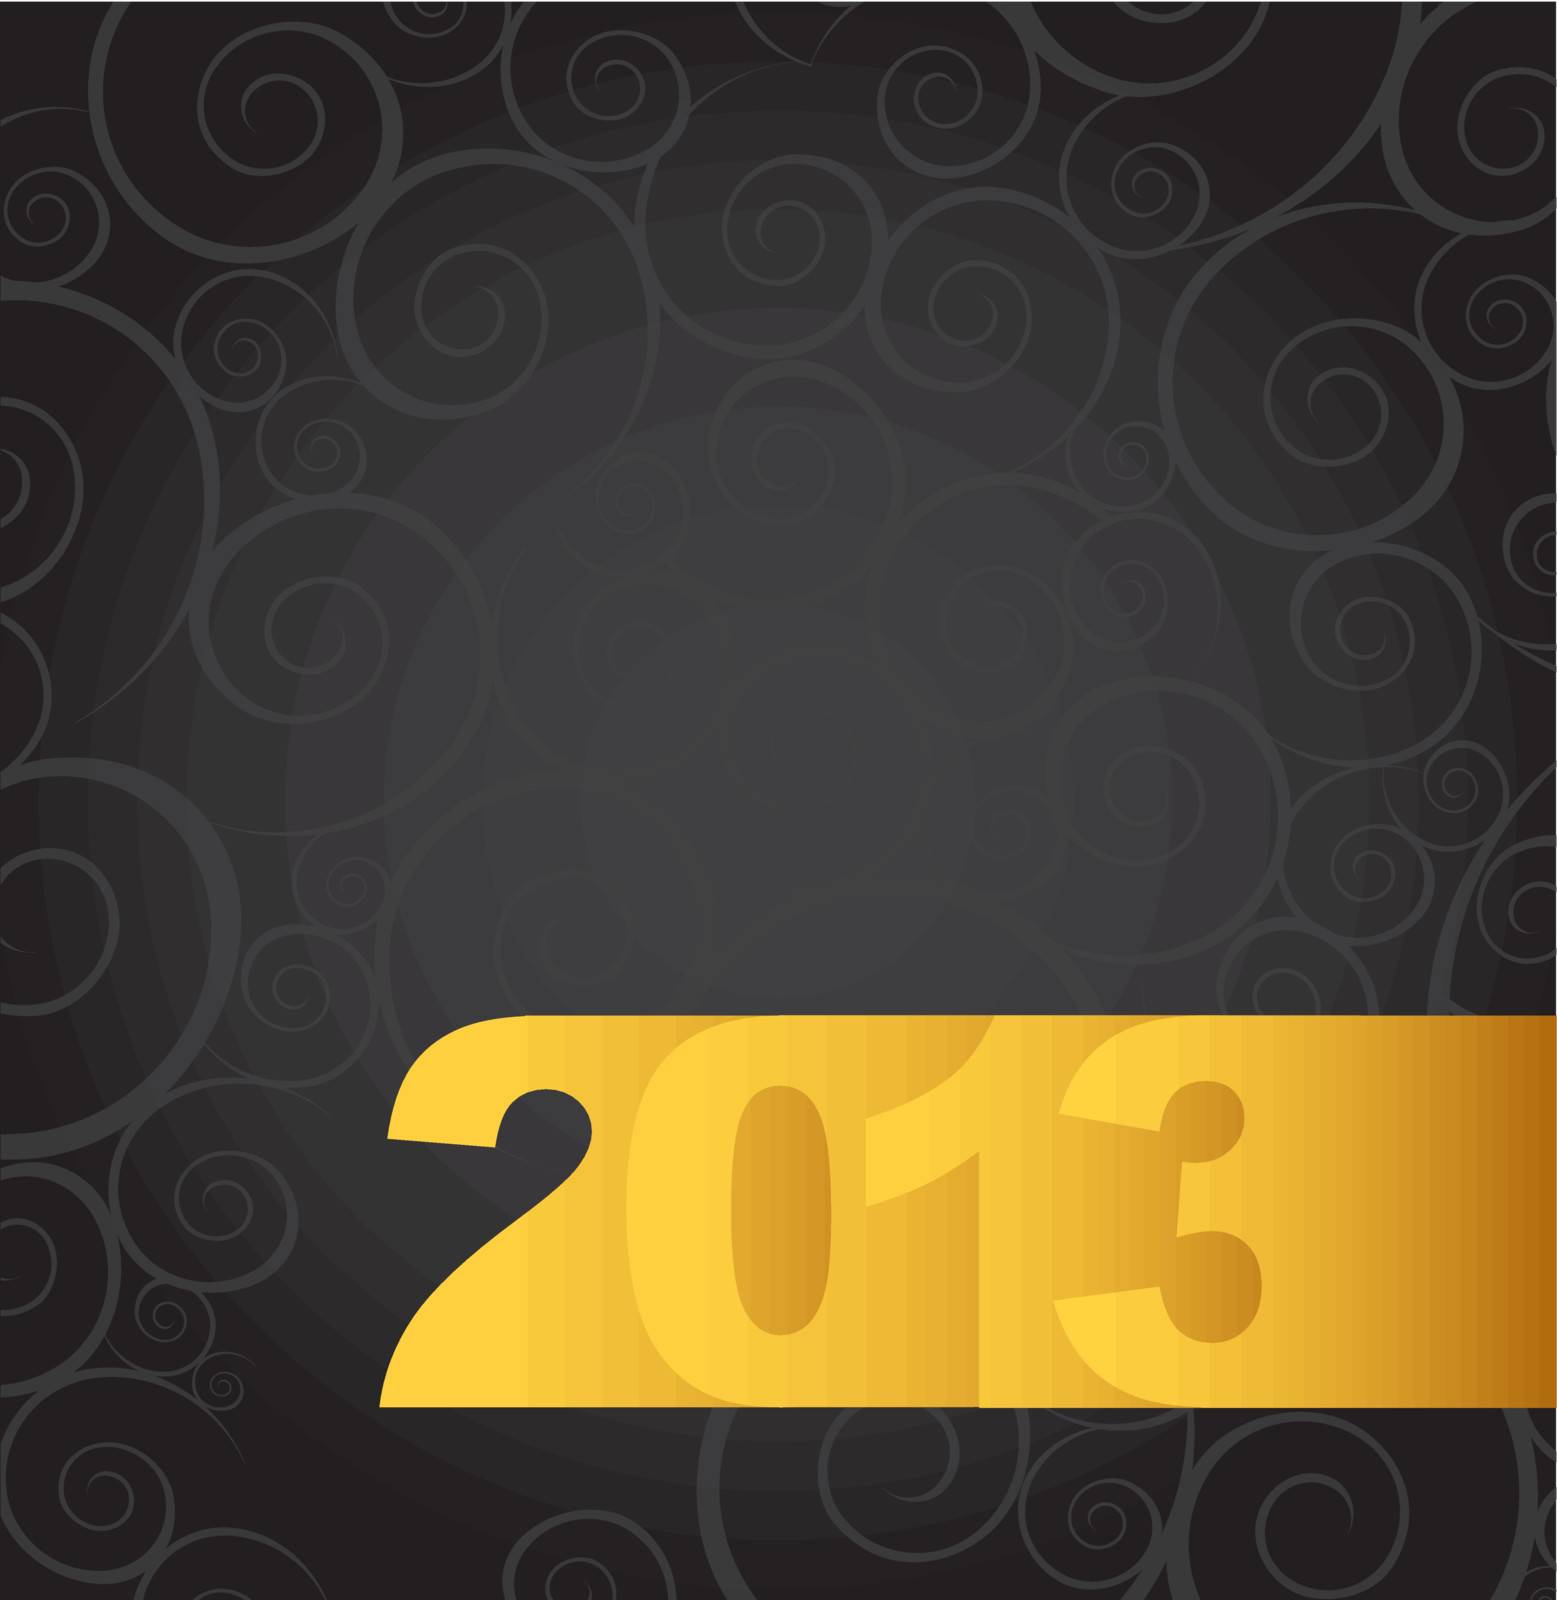 New year gold over black background vector illustration